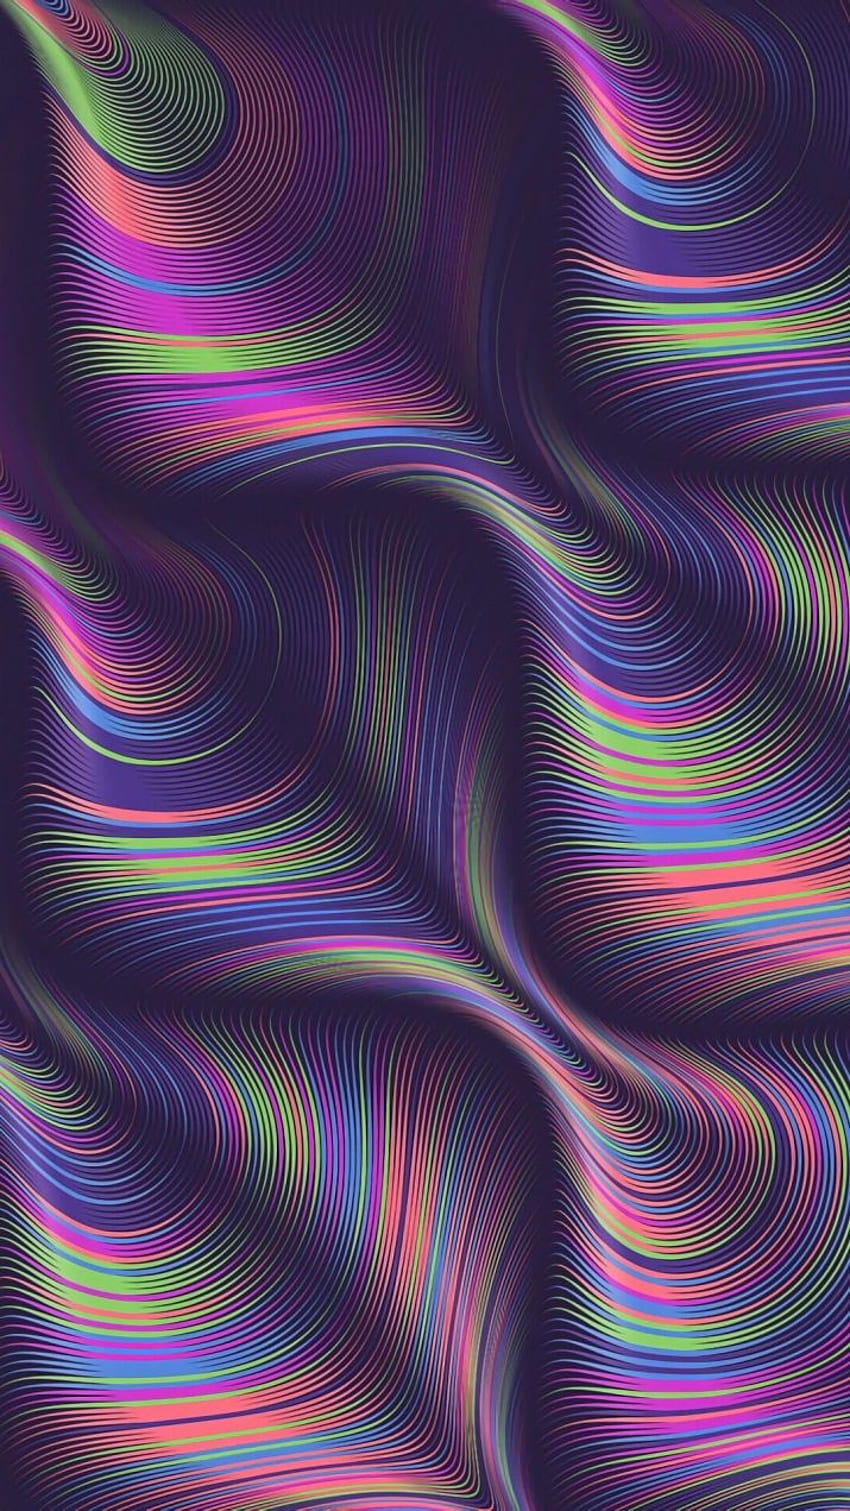 A colorful, abstract pattern of swirling lines - Trippy